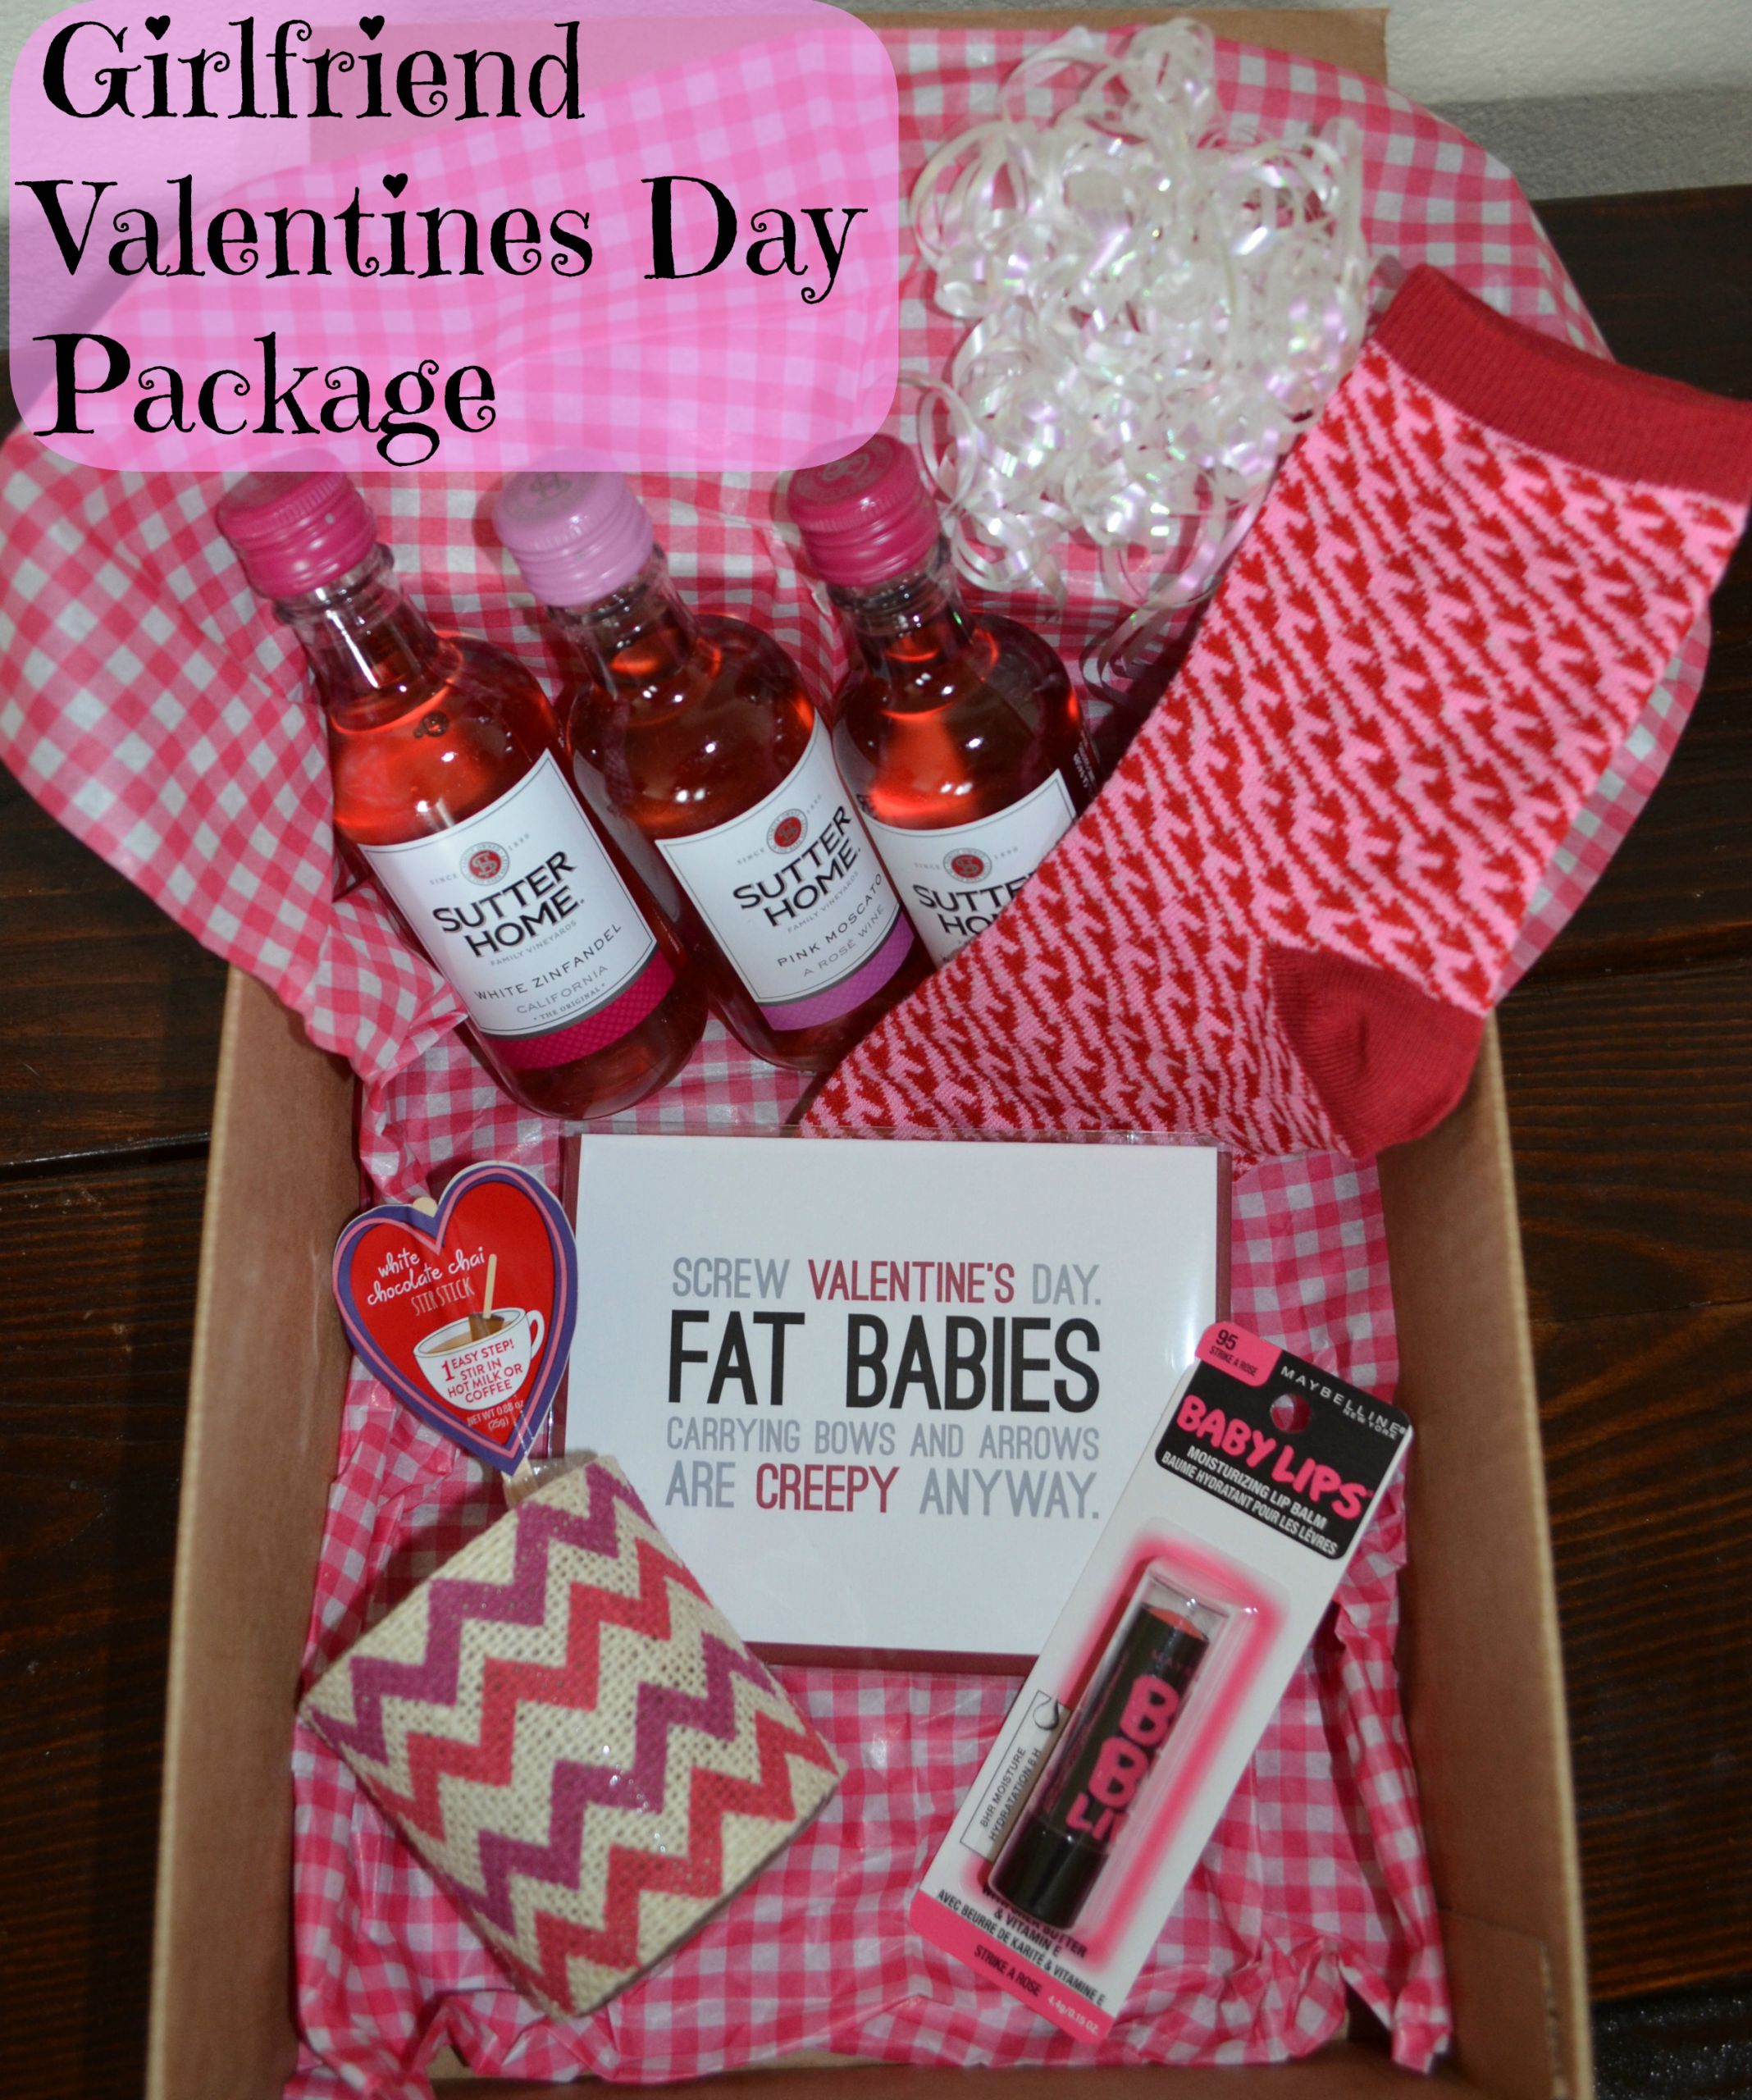 Valentines Gift Ideas For Women
 24 ADORABLE GIFT IDEAS FOR THE WOMEN IN YOUR LIFE